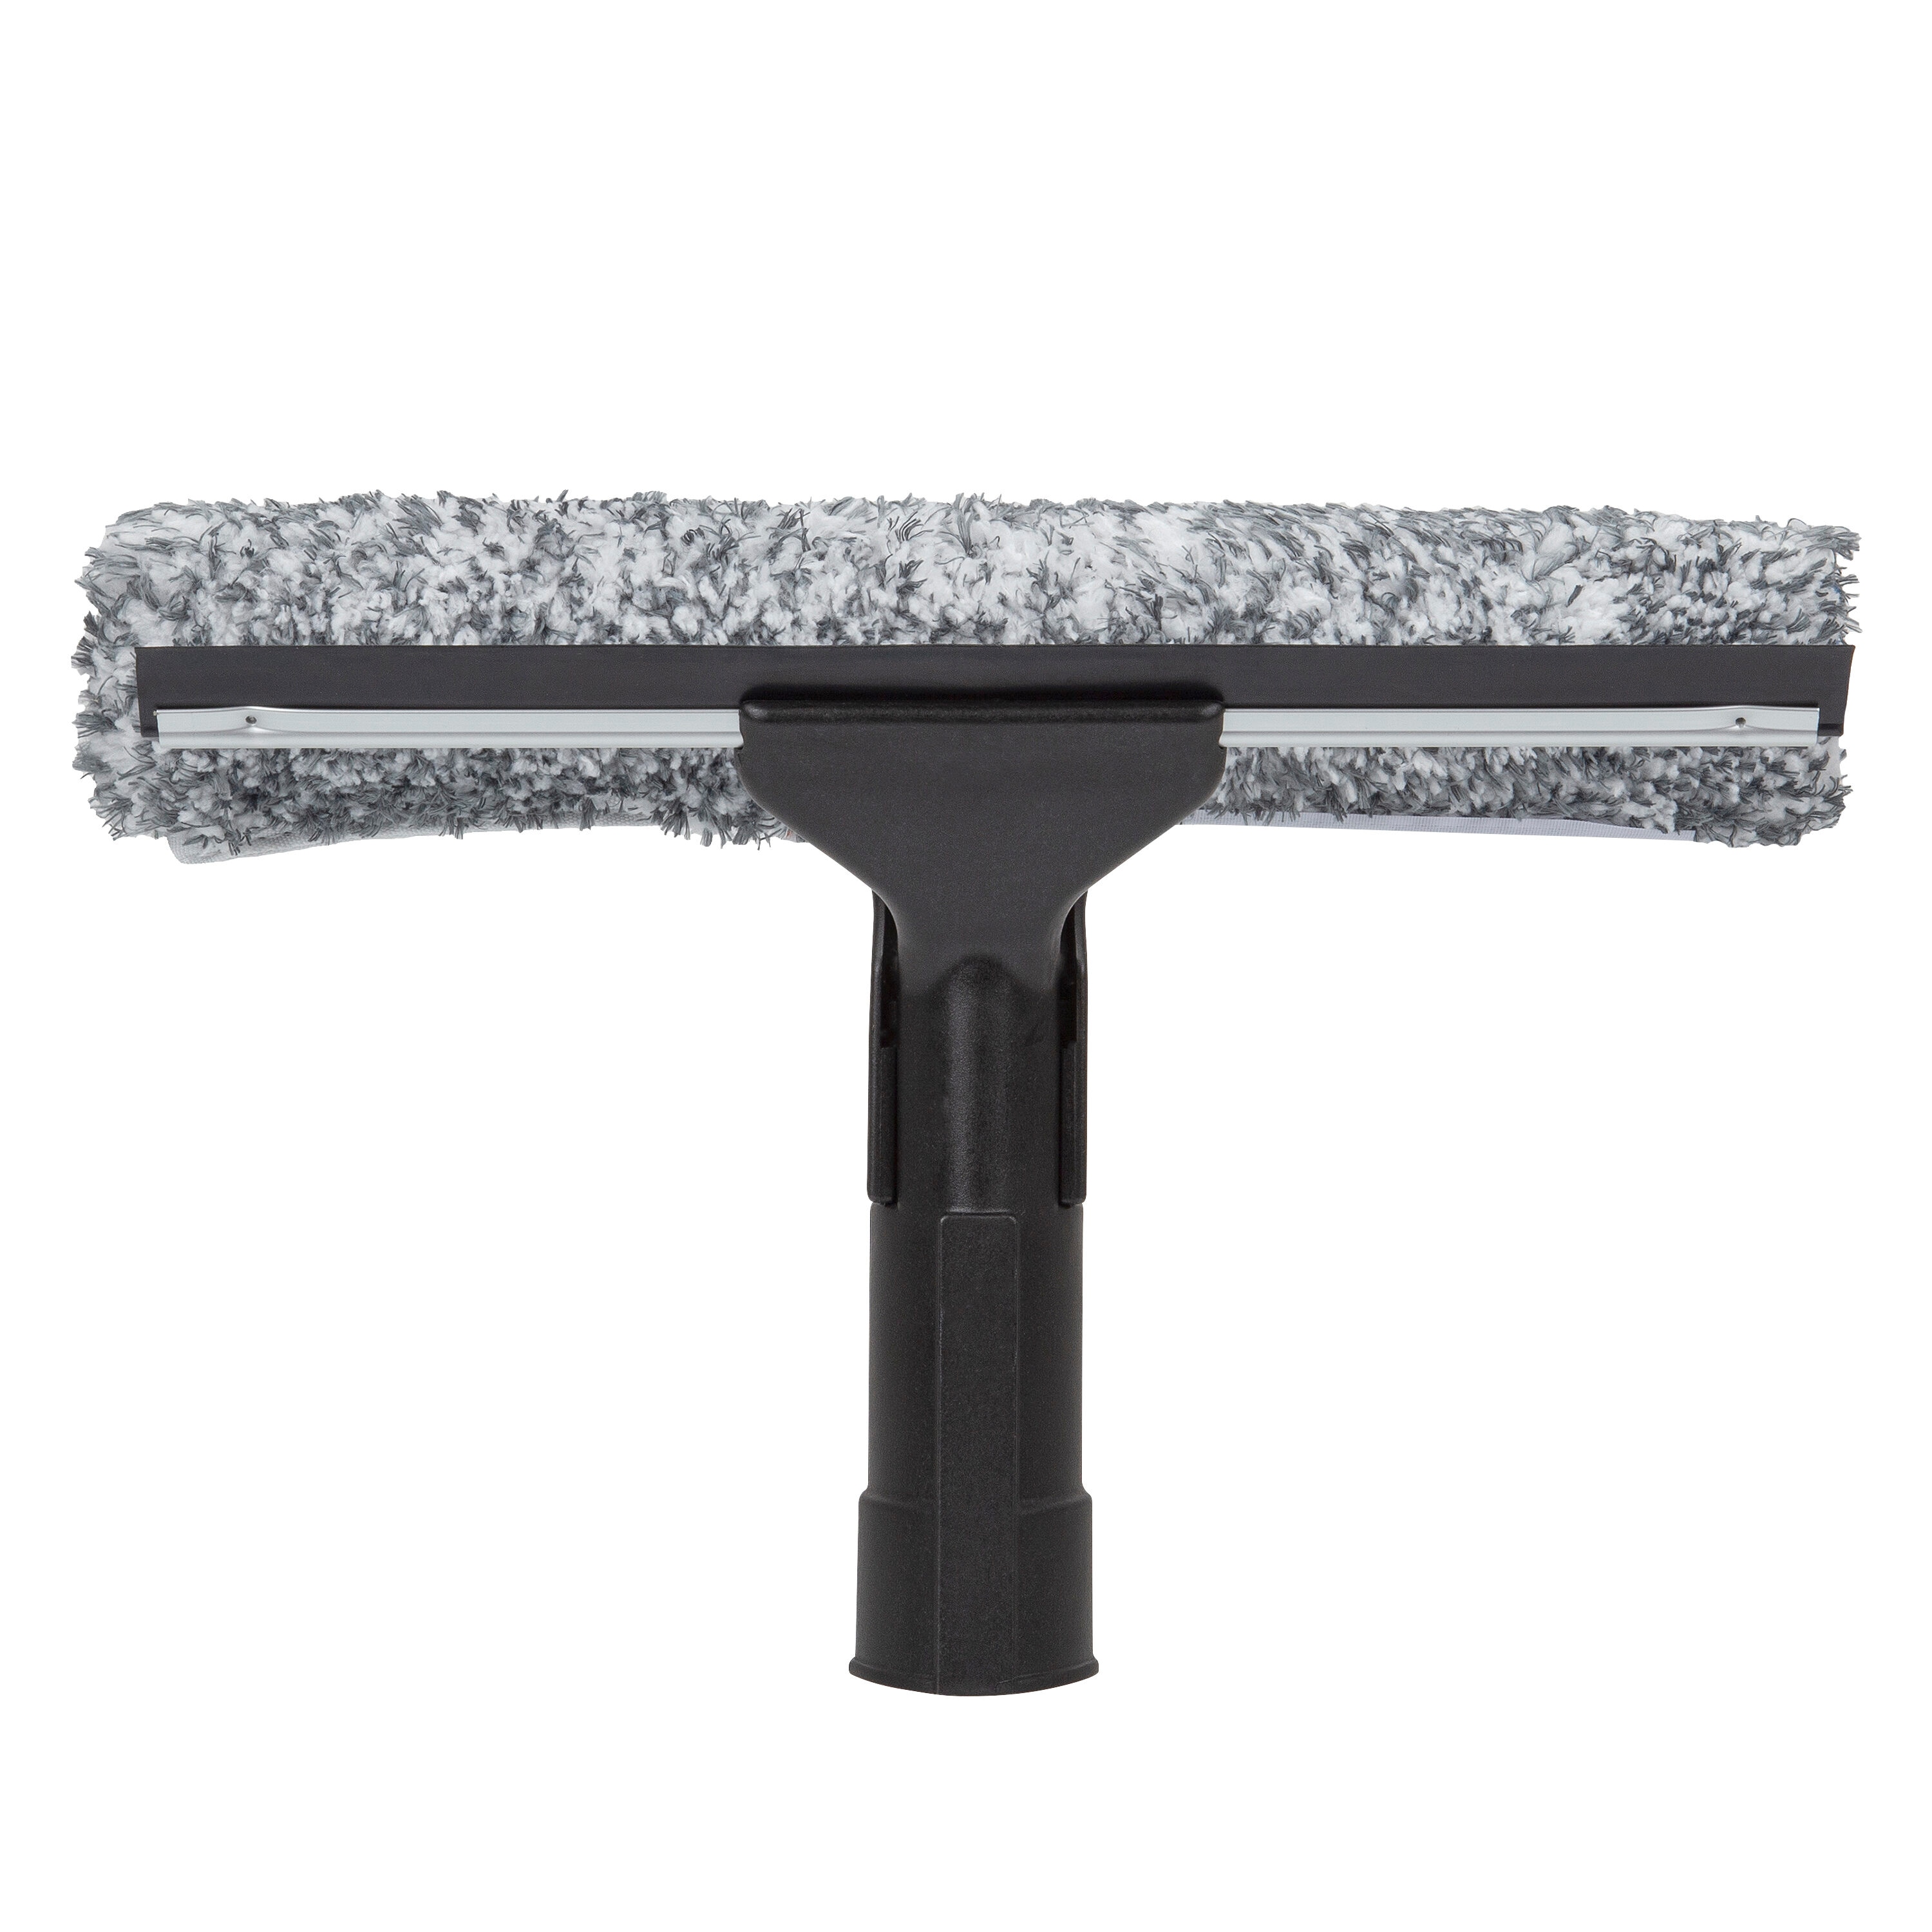 OXO Good Grips Stainless Steel Squeegee : Health & Household 